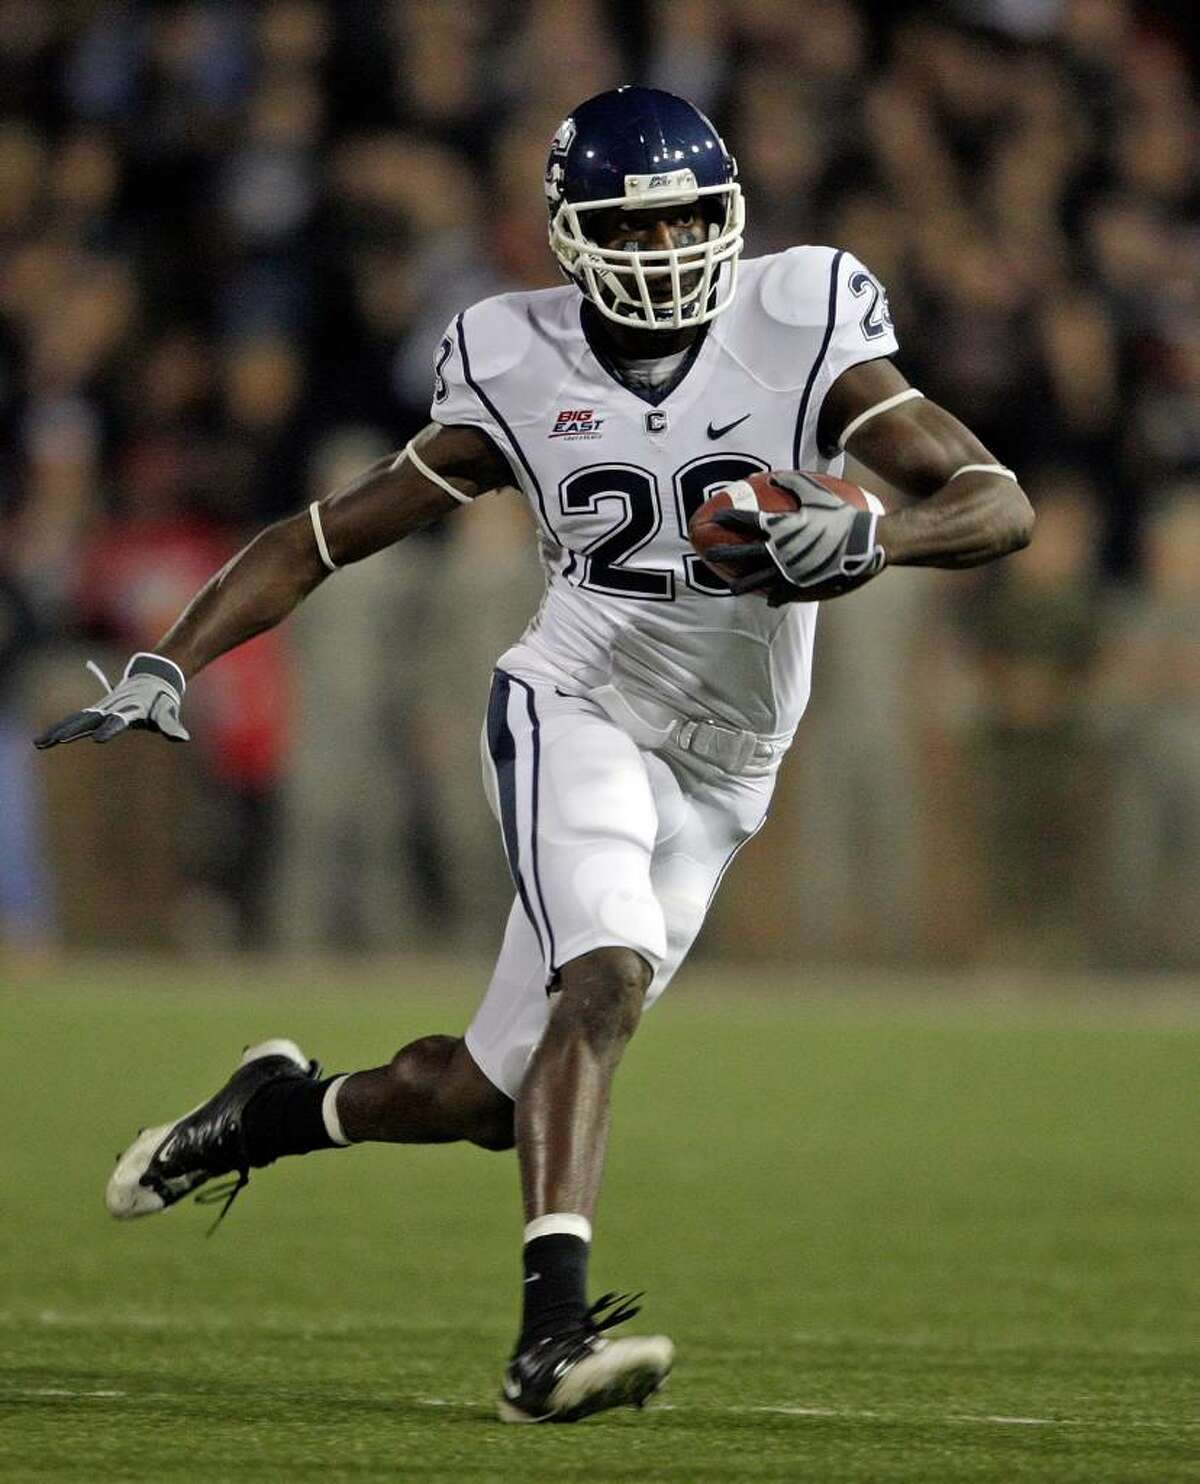 Marcus Easley #29 of the Connecticut Huskies runs with the ball against the Cincinnati Bearcats during the Big East Conference game at Nippert Stadium on November 7, 2009 in Cincinnati, Ohio. (Photo by Andy Lyons/Getty Images)